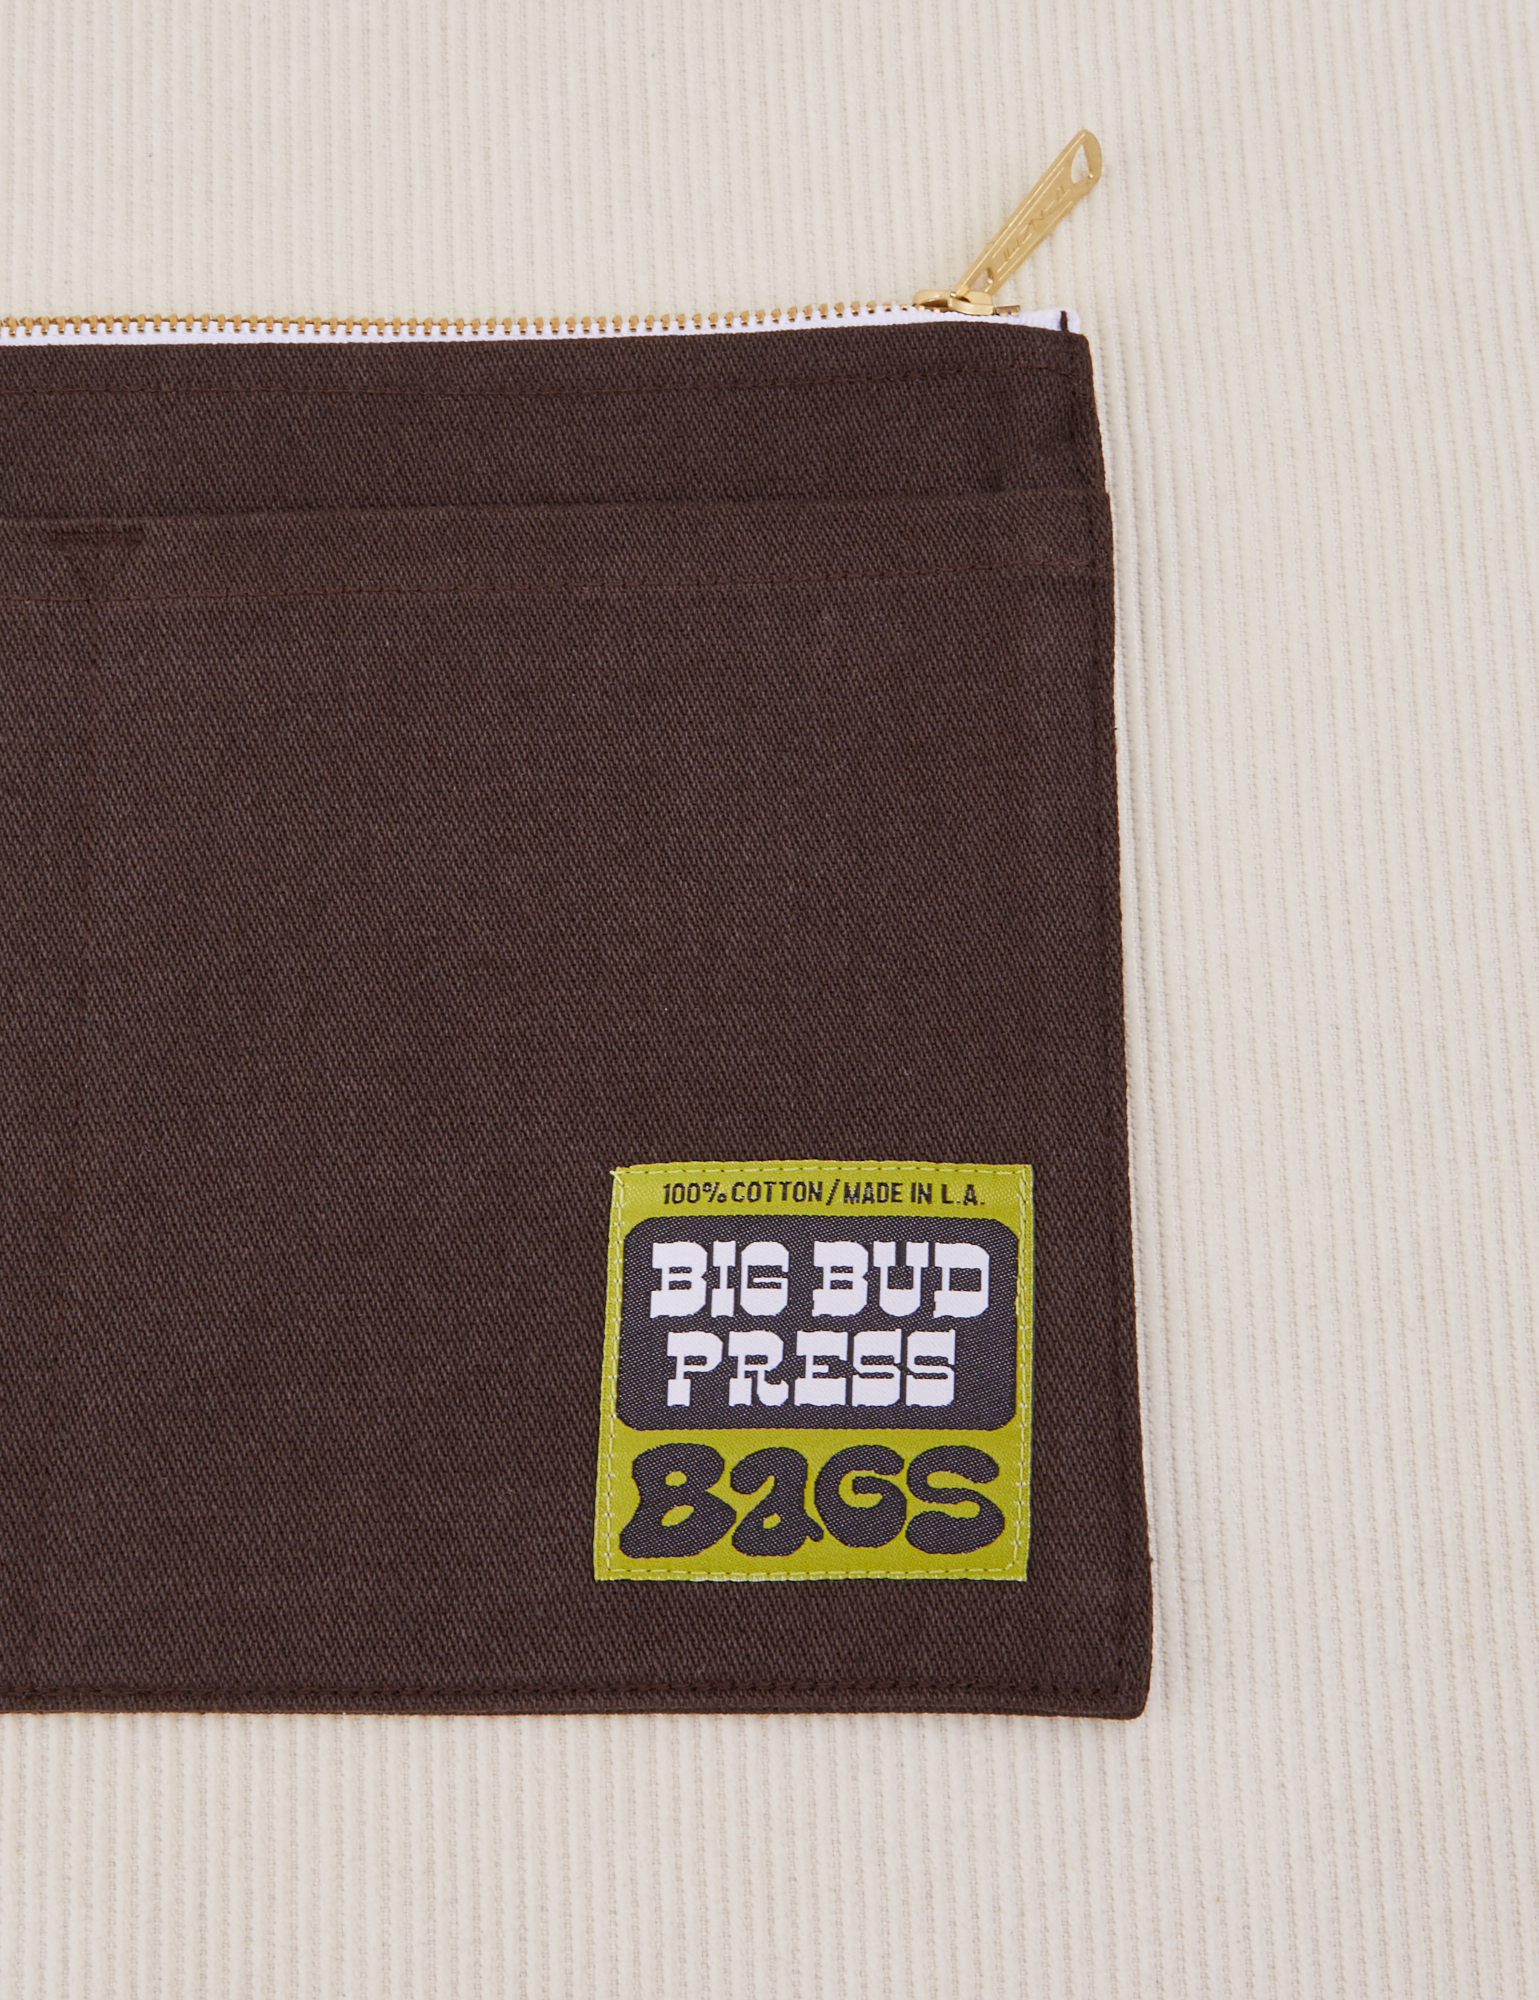 Big Pouch in Espresso Brown with Big Bud Press label in green